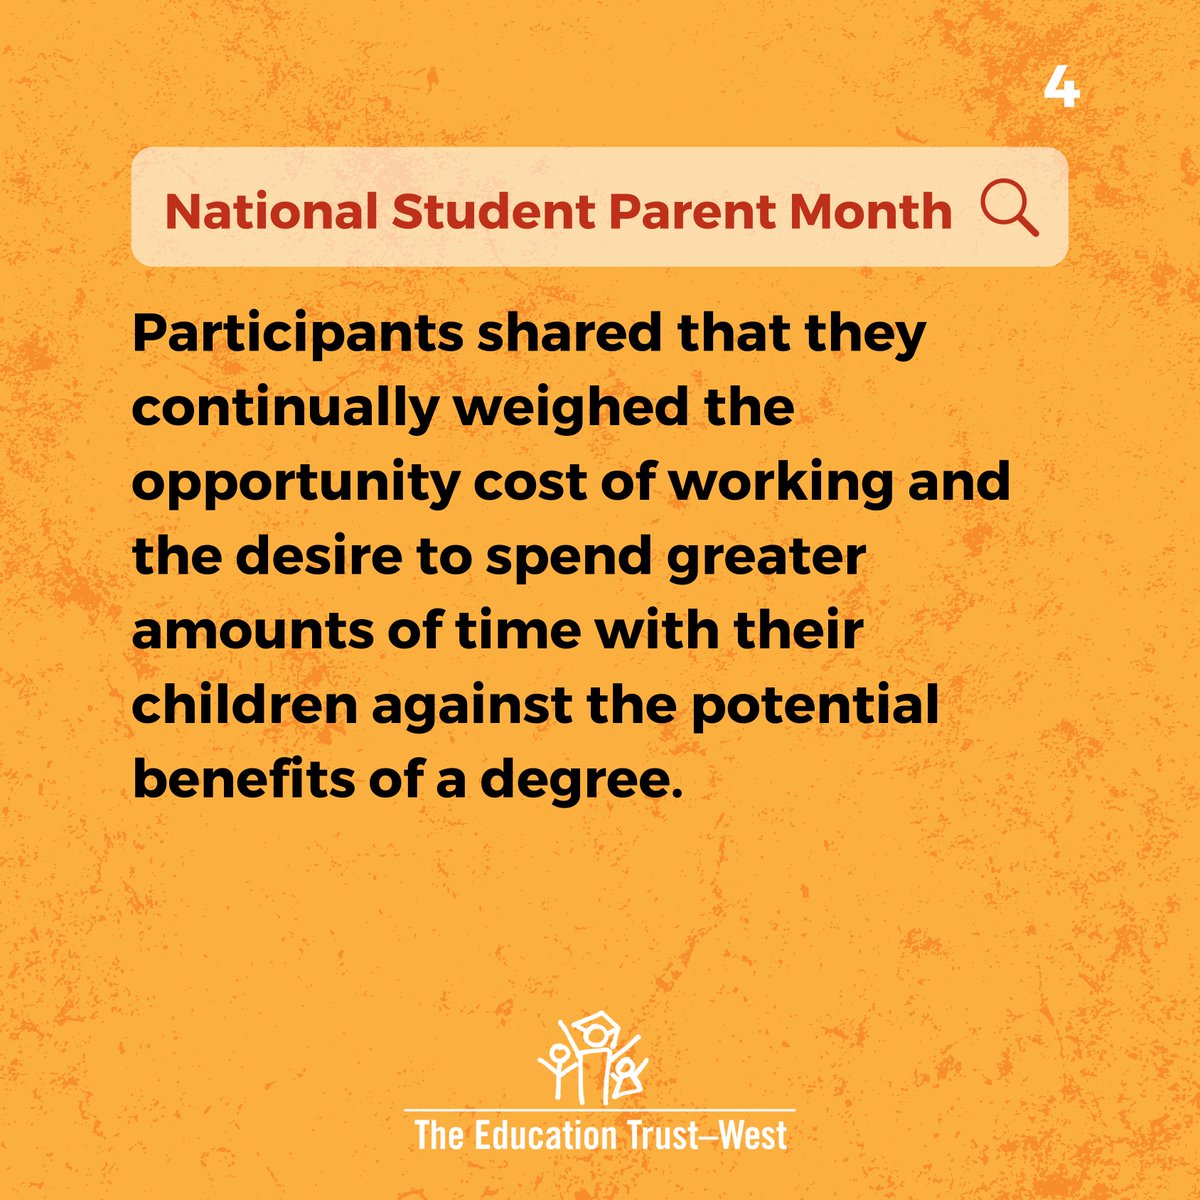 #NationalStudentParentMonth

📢Read our full report, Hear My Voice II: Supporting Success for Parenting and Unhoused Women of Color, here: edtrustwest.info/myvoice2